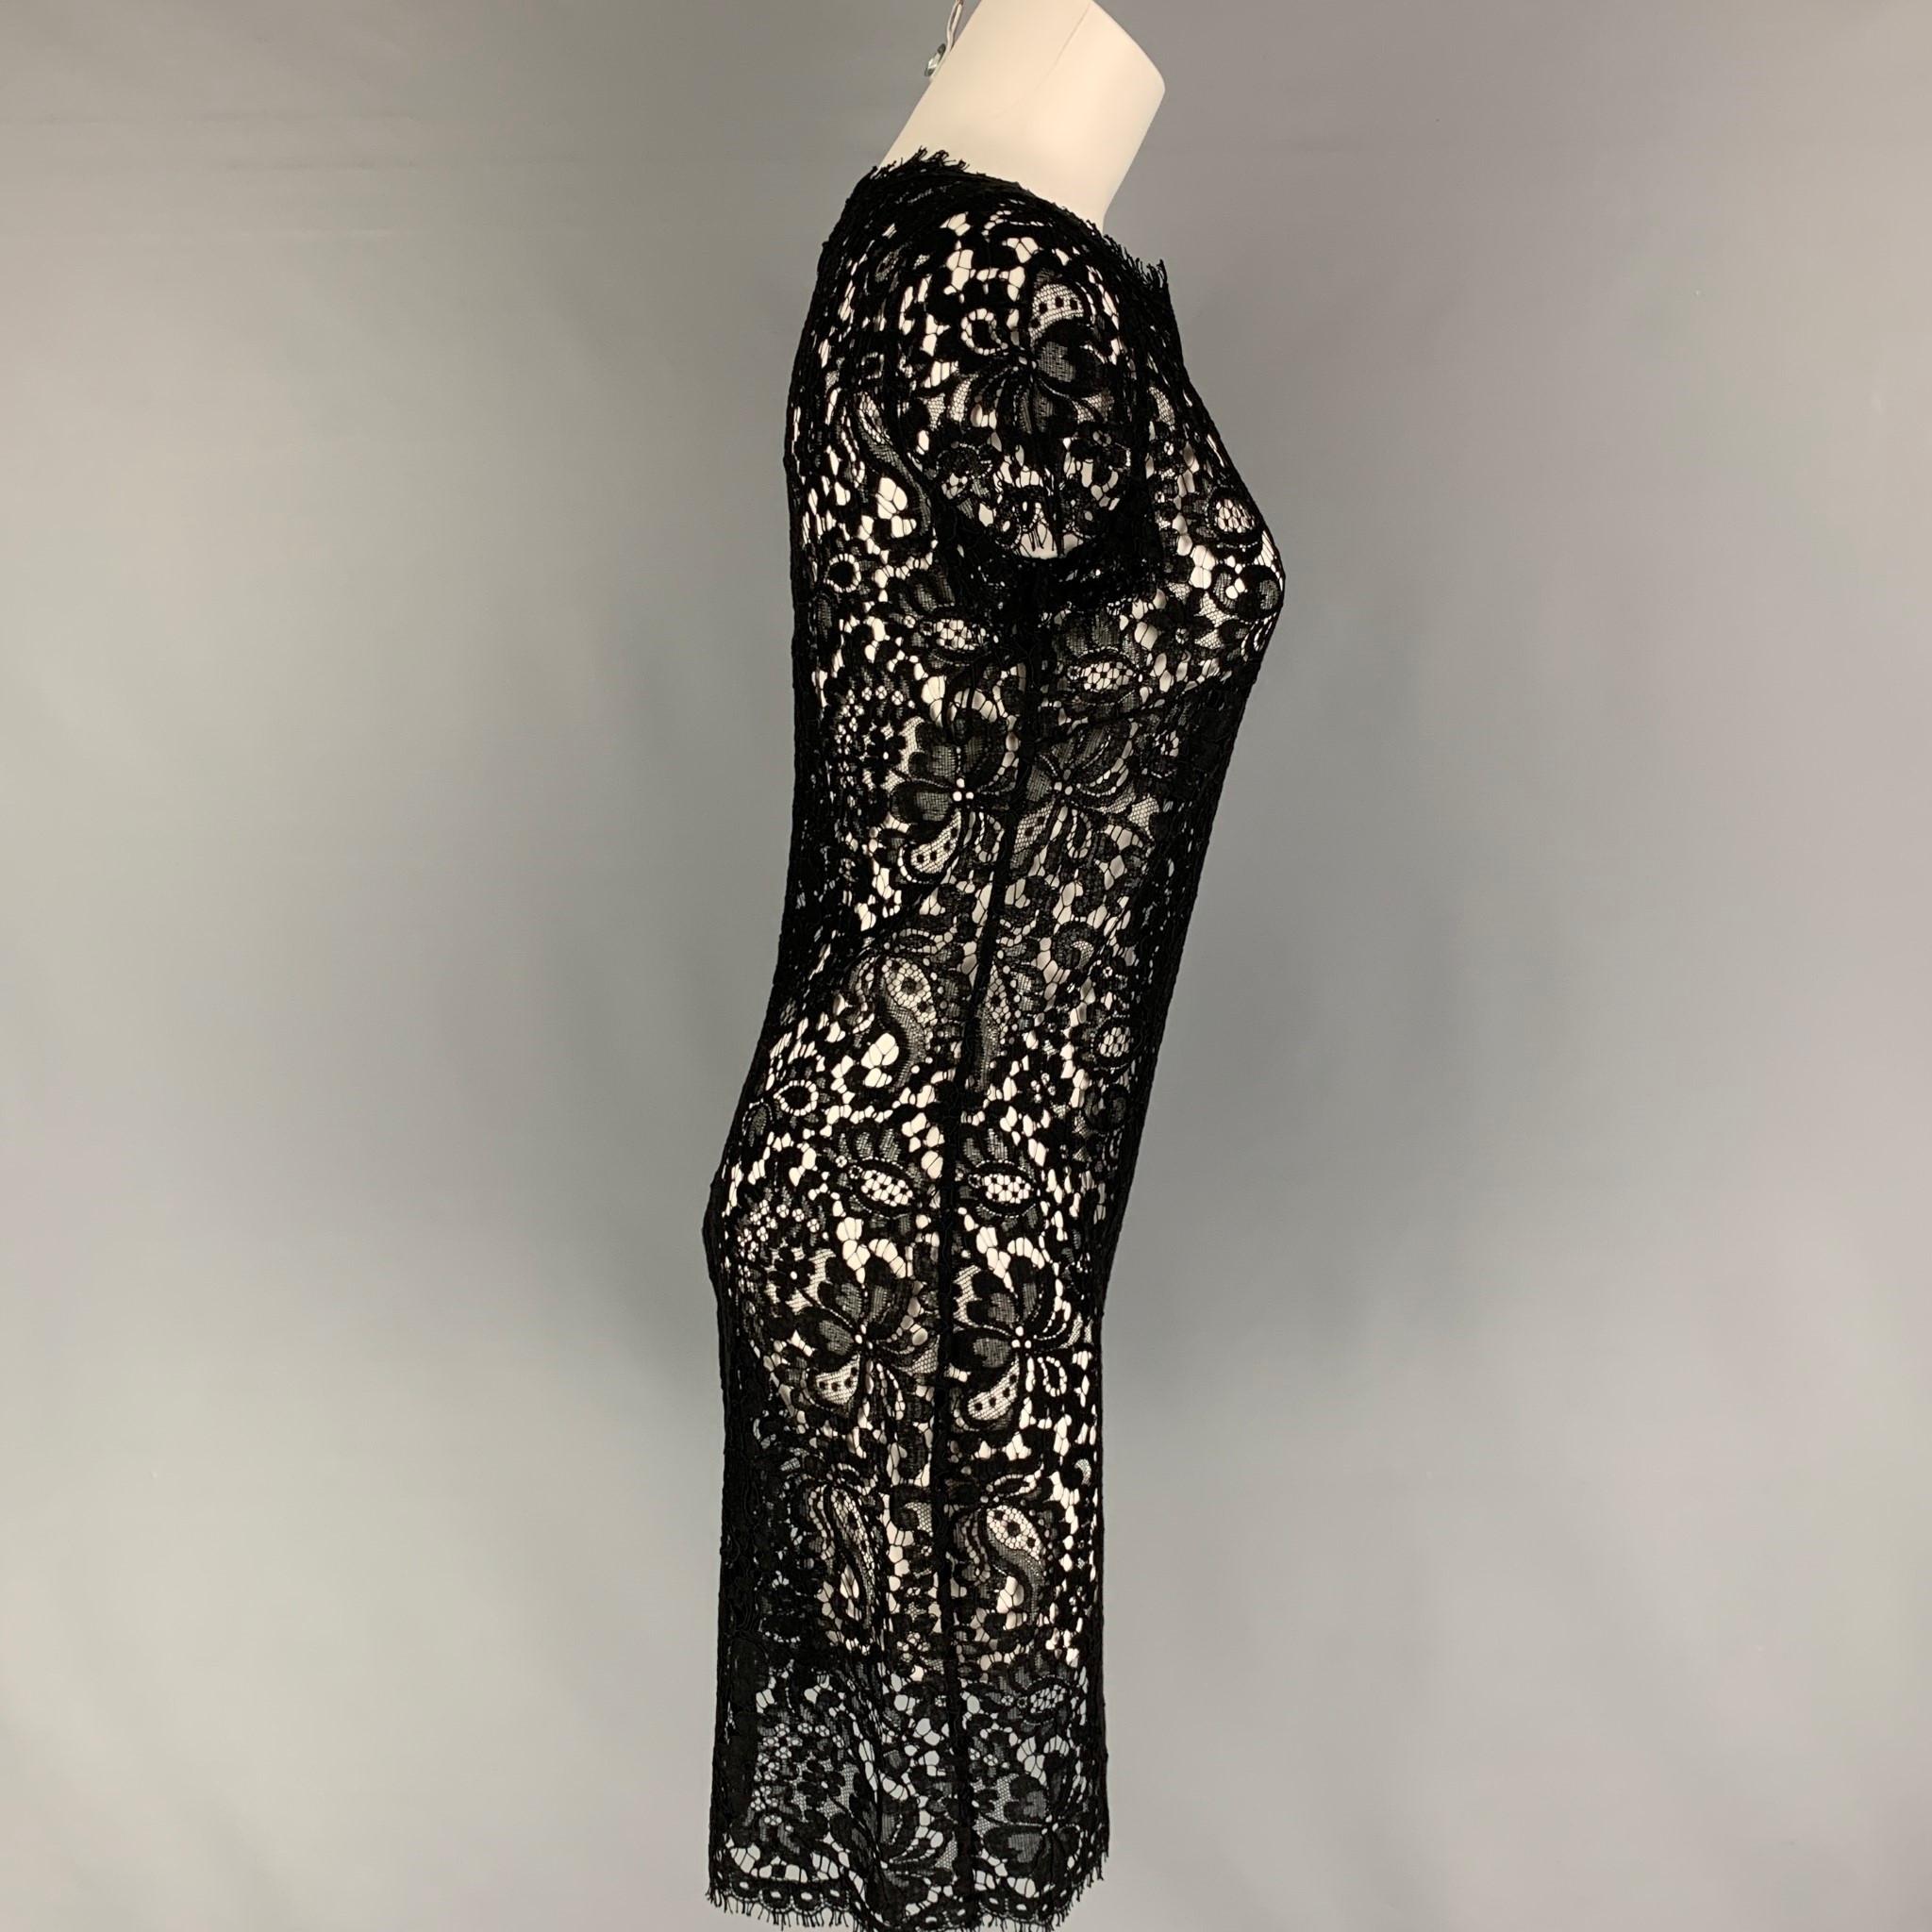 RALPH LAUREN 'Black Label' dress comes in a black lace cotton blend featuring short sleeves and a back zip up closure. 

Very Good Pre-Owned Condition.
Marked: 10

Measurements:

Shoulder: 15 in.
Bust: 34 in.
Waist: 32 in.
Hip: 36 in.
Sleeve: 8